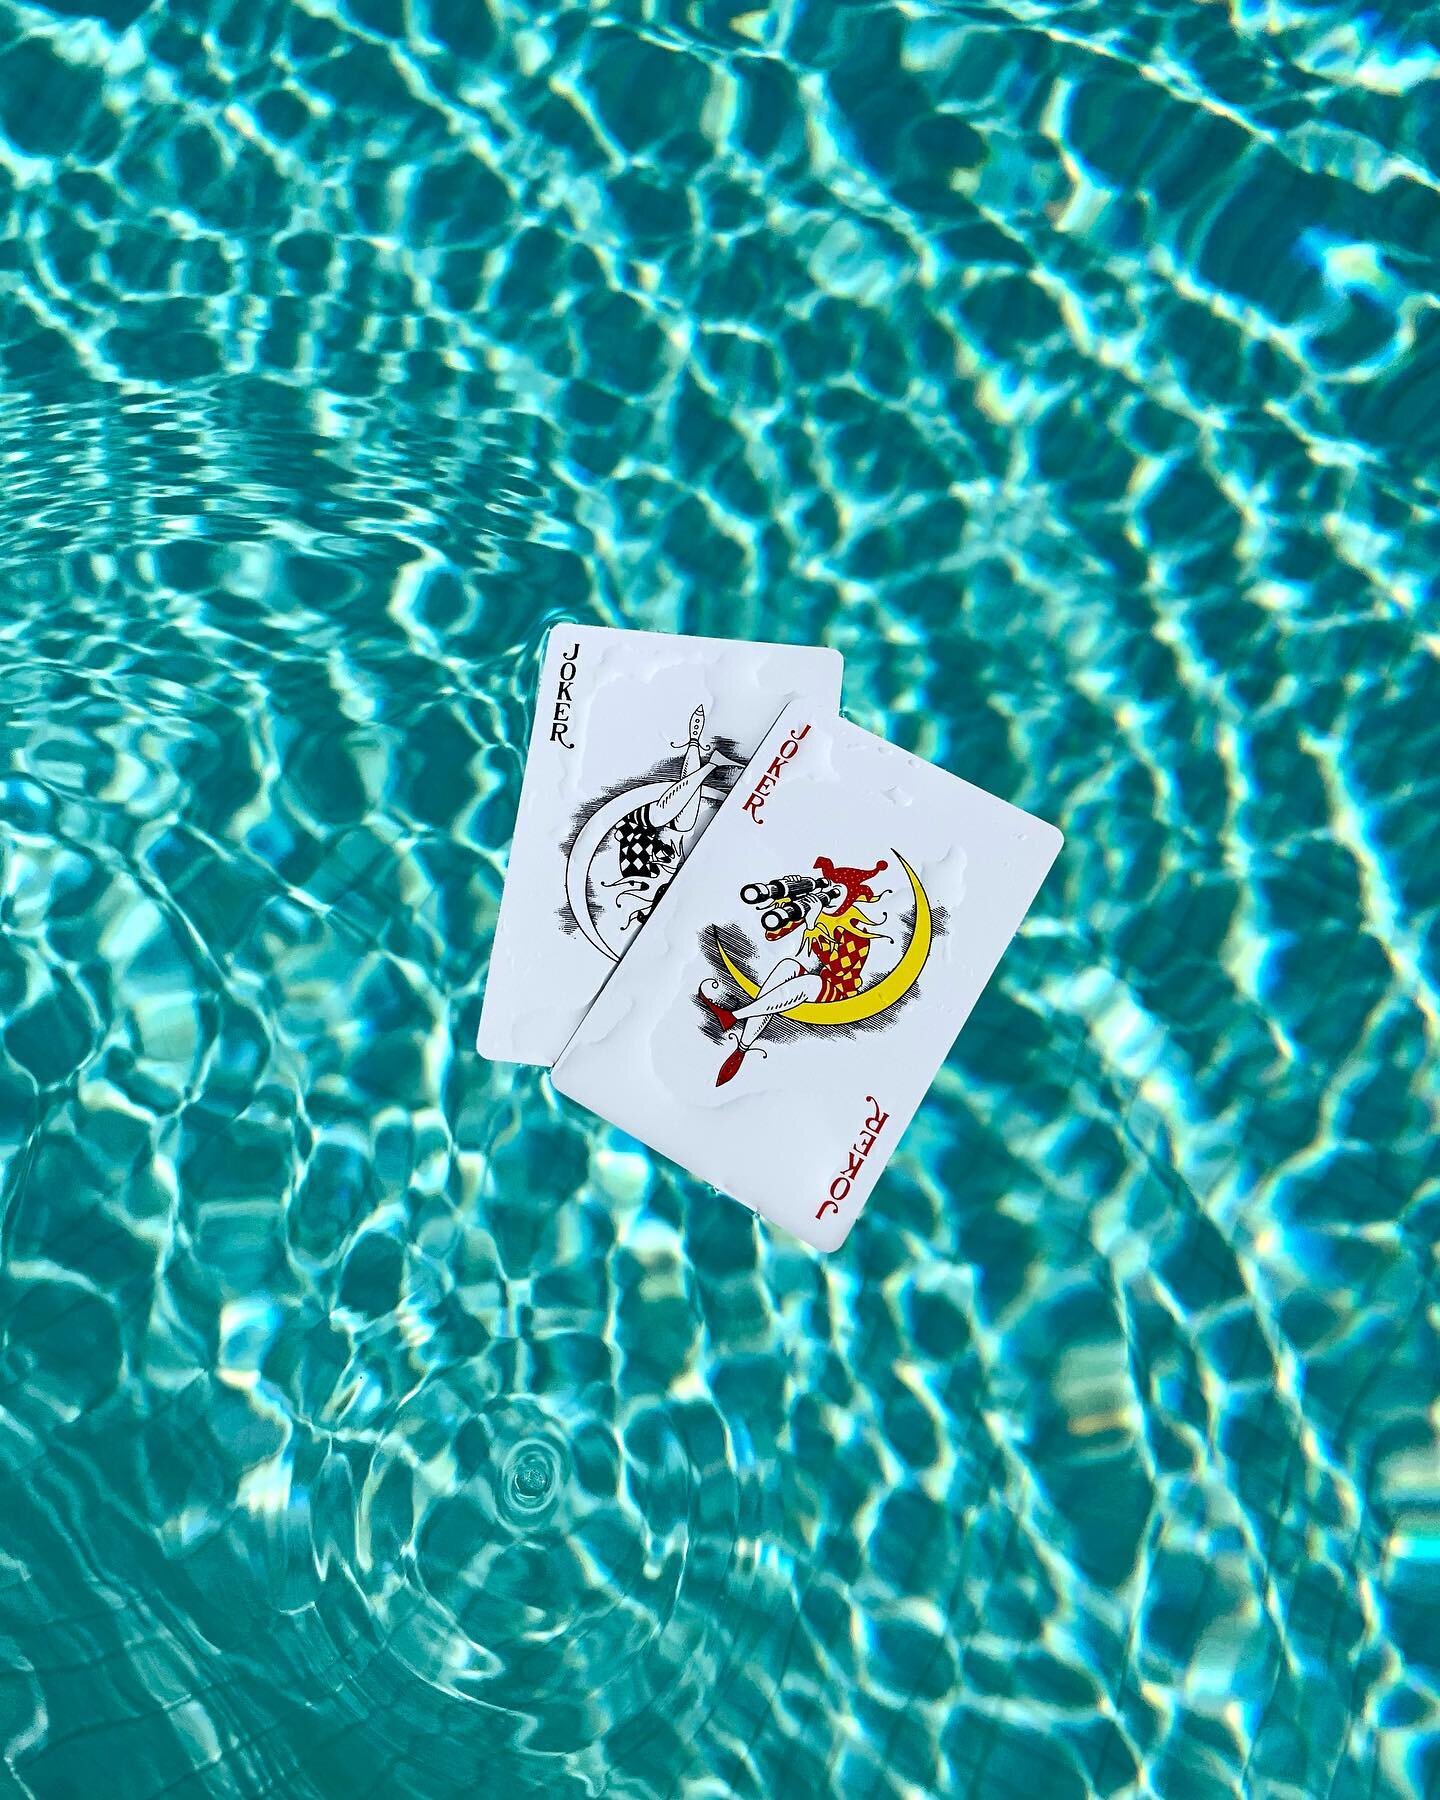 These cards are no joke 🃏#happyaprilfoolsday 
.
.
.
.
.
#nodproducts #womenowned #waterproof #poolparty #pooltime #poolday #cardgame #cardgamesofinstagram